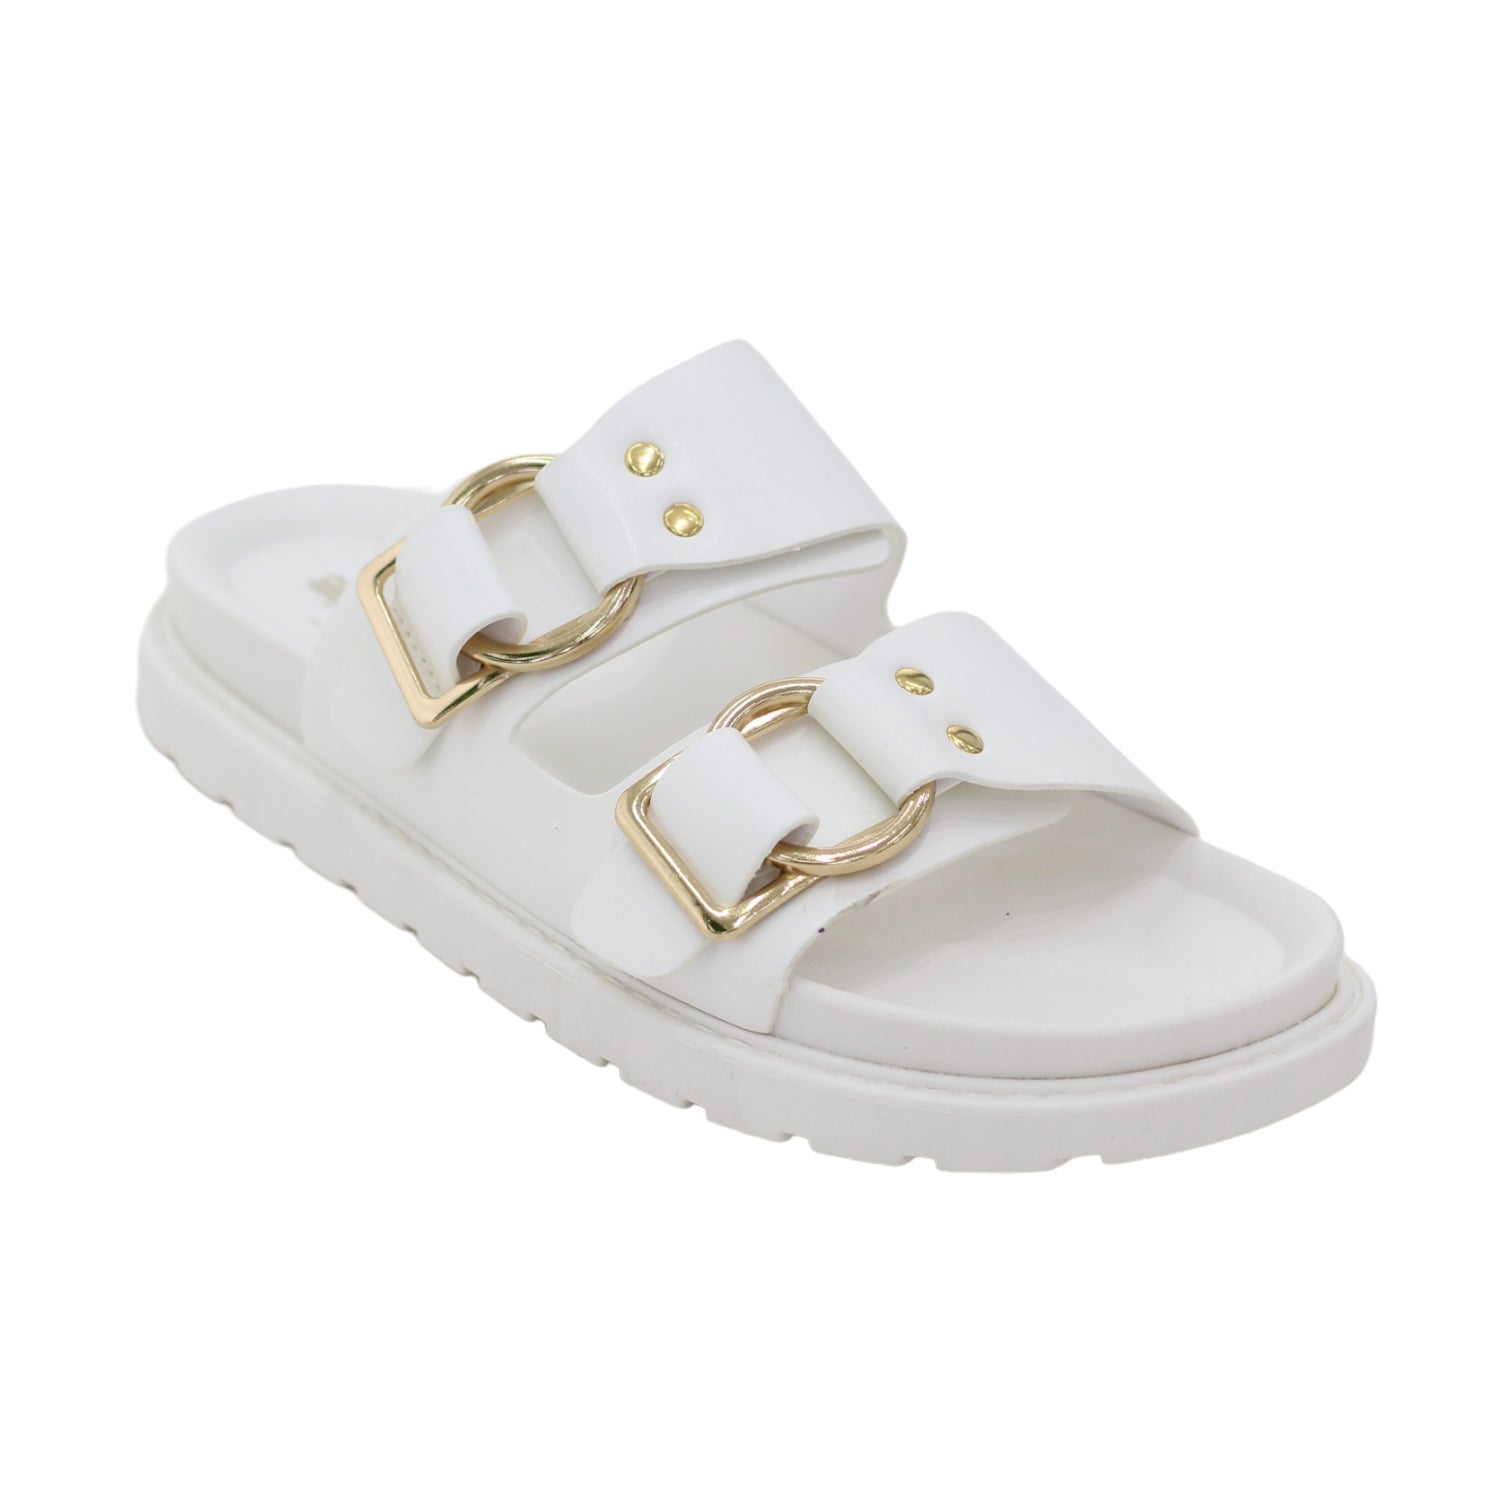 Saria double monk buckle bands slide white